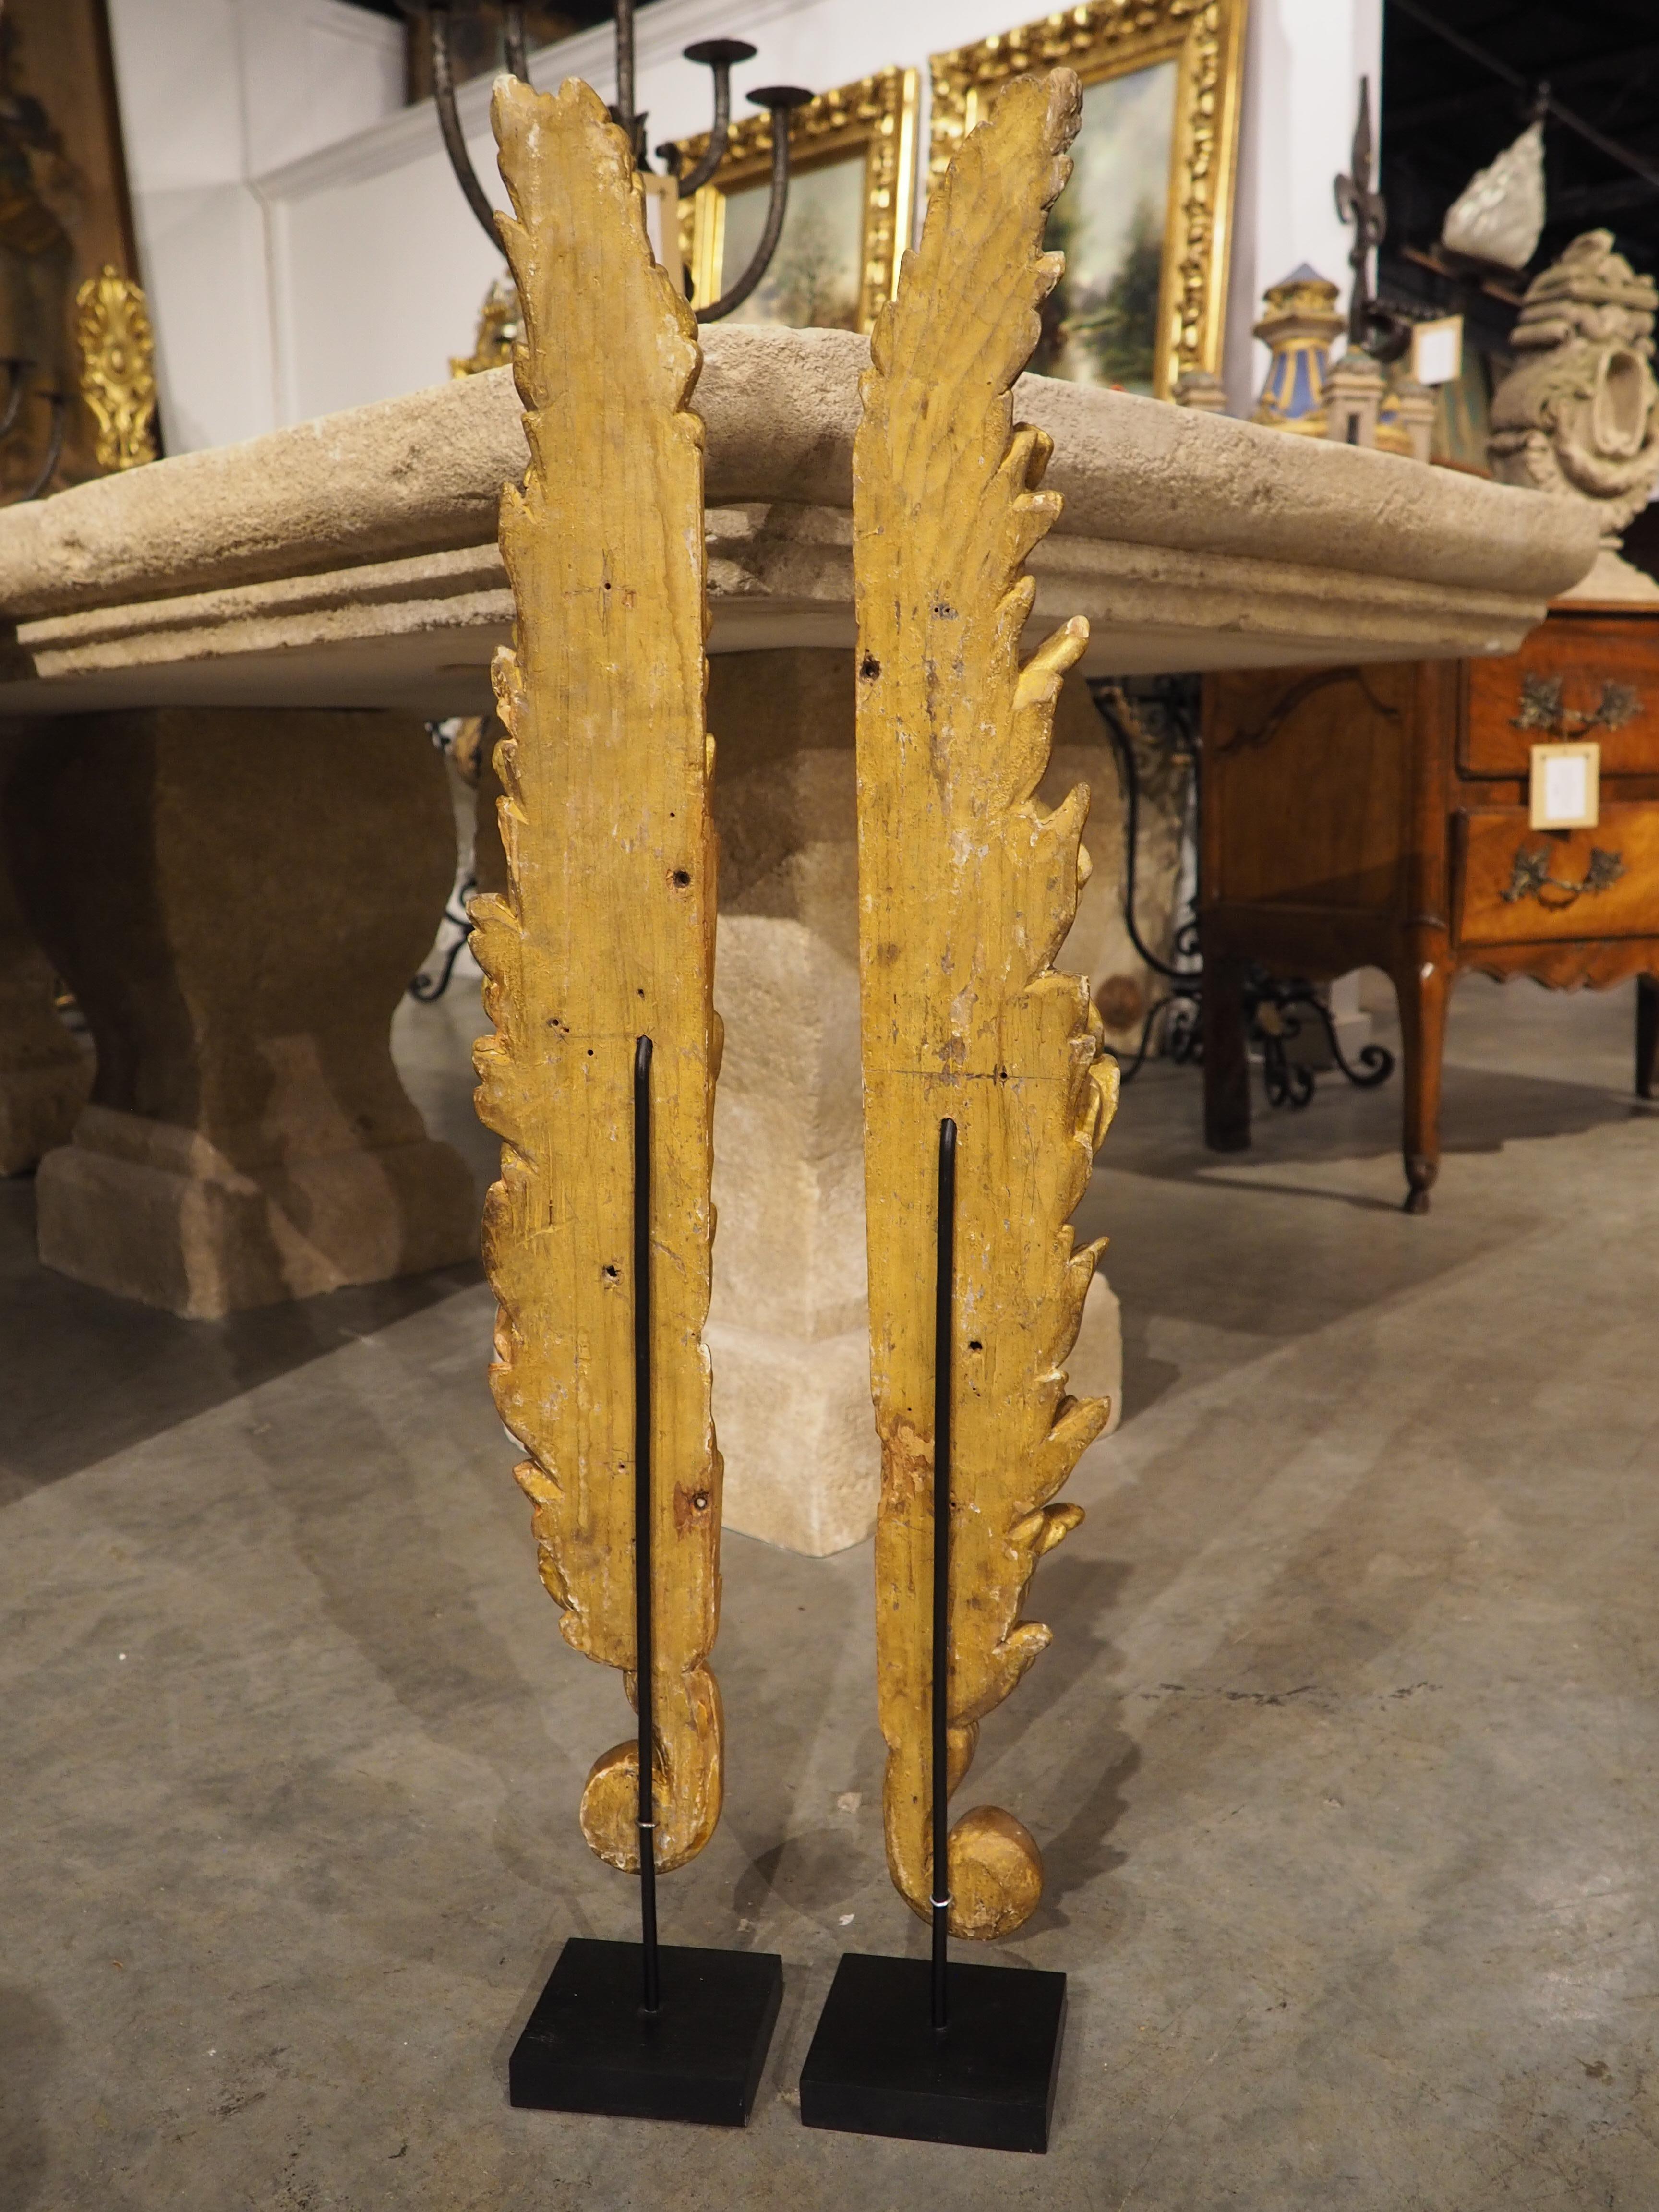 Hand-Carved Pair of 18th Century Giltwood Altar Ornaments from Italy (34 inches tall)